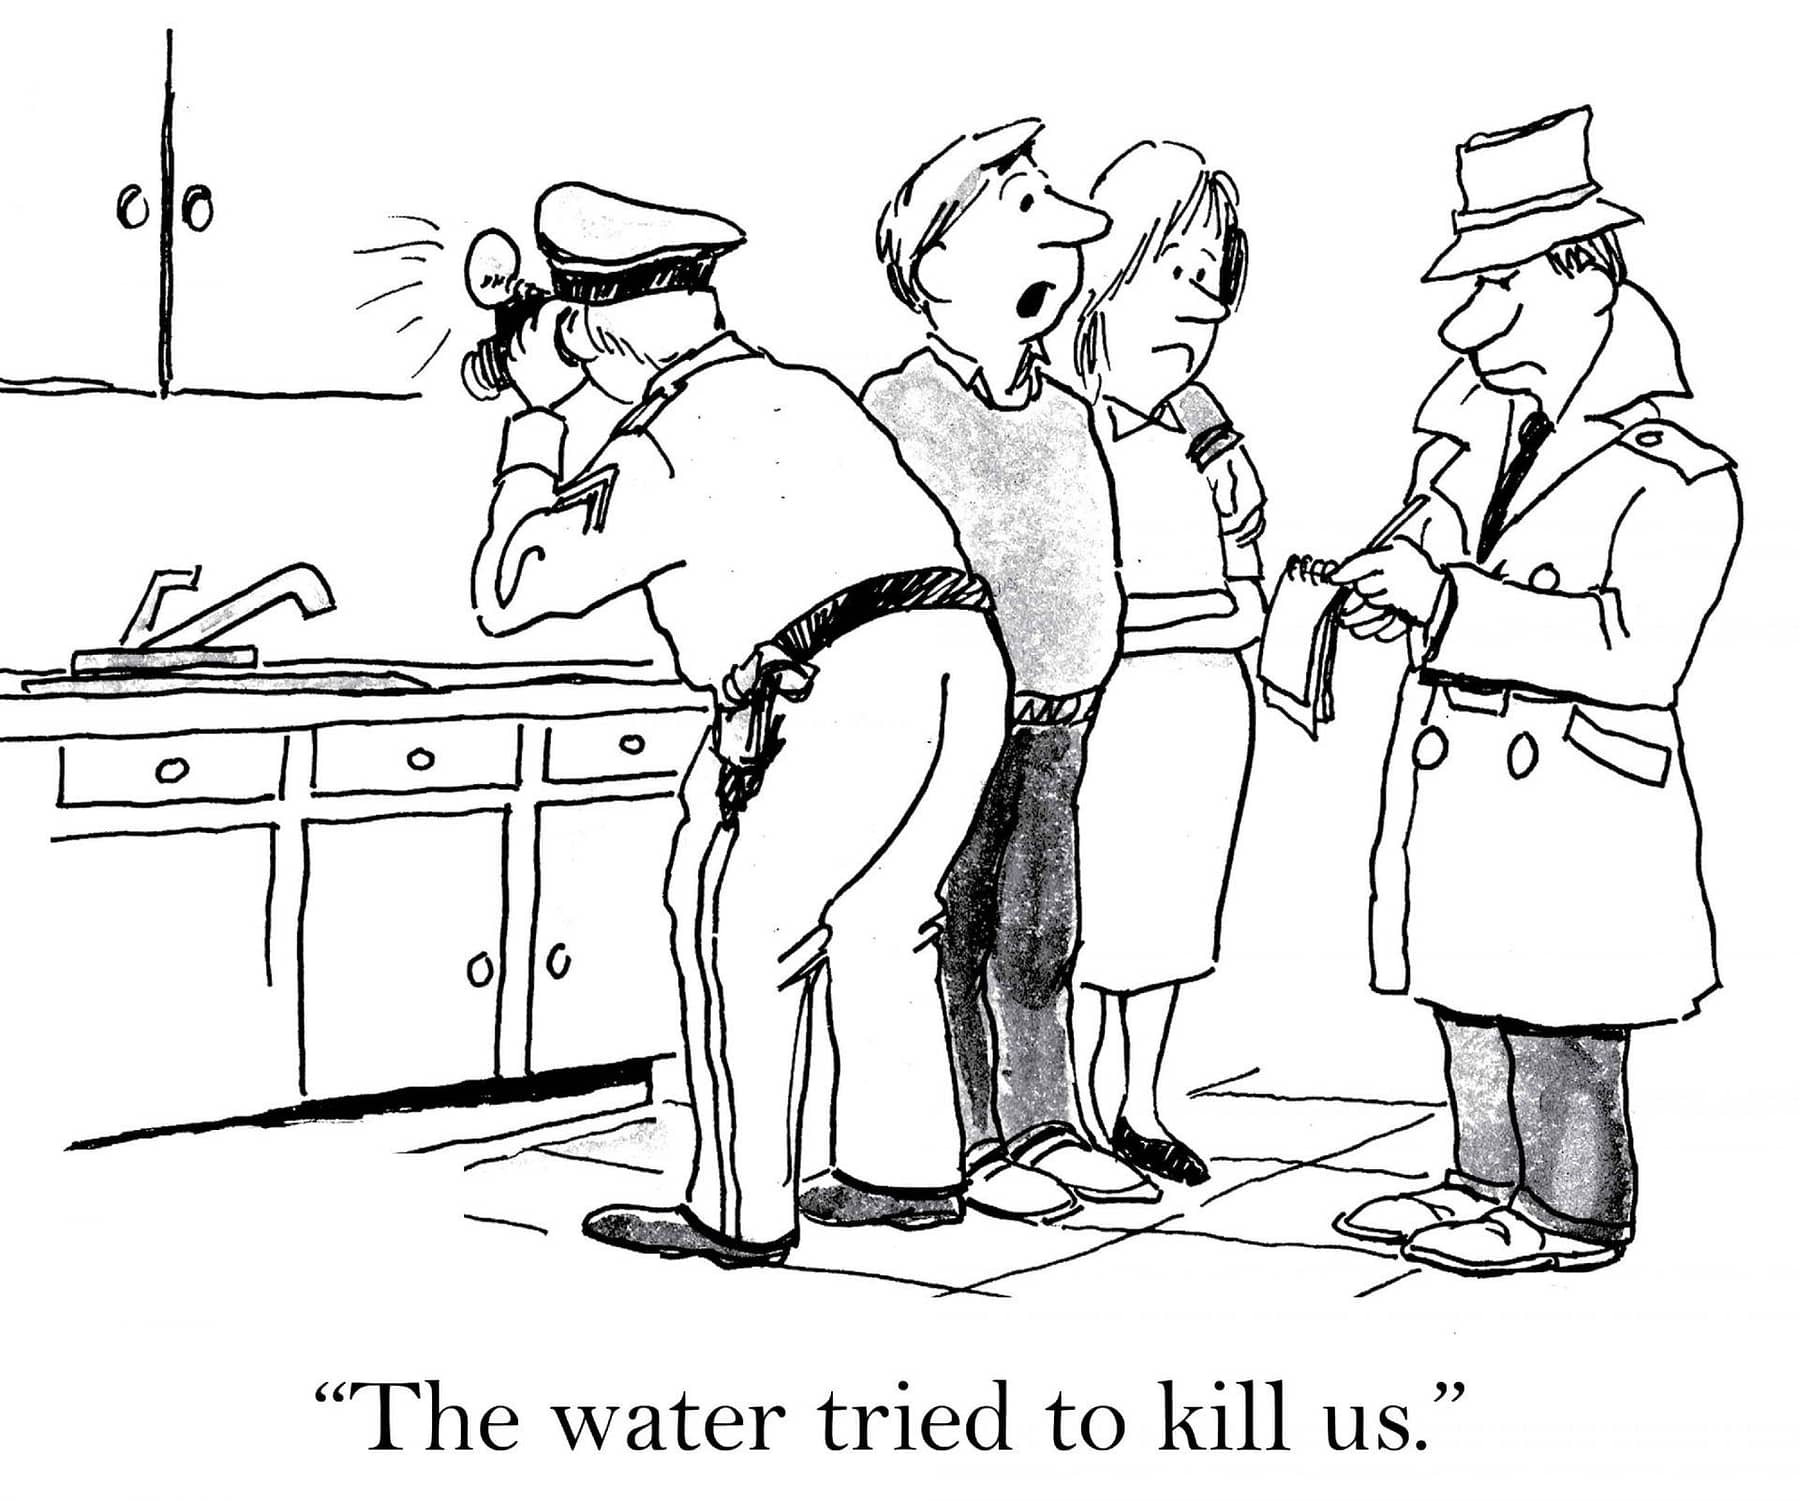 Water pollution comic strip "The water tried to kill us."